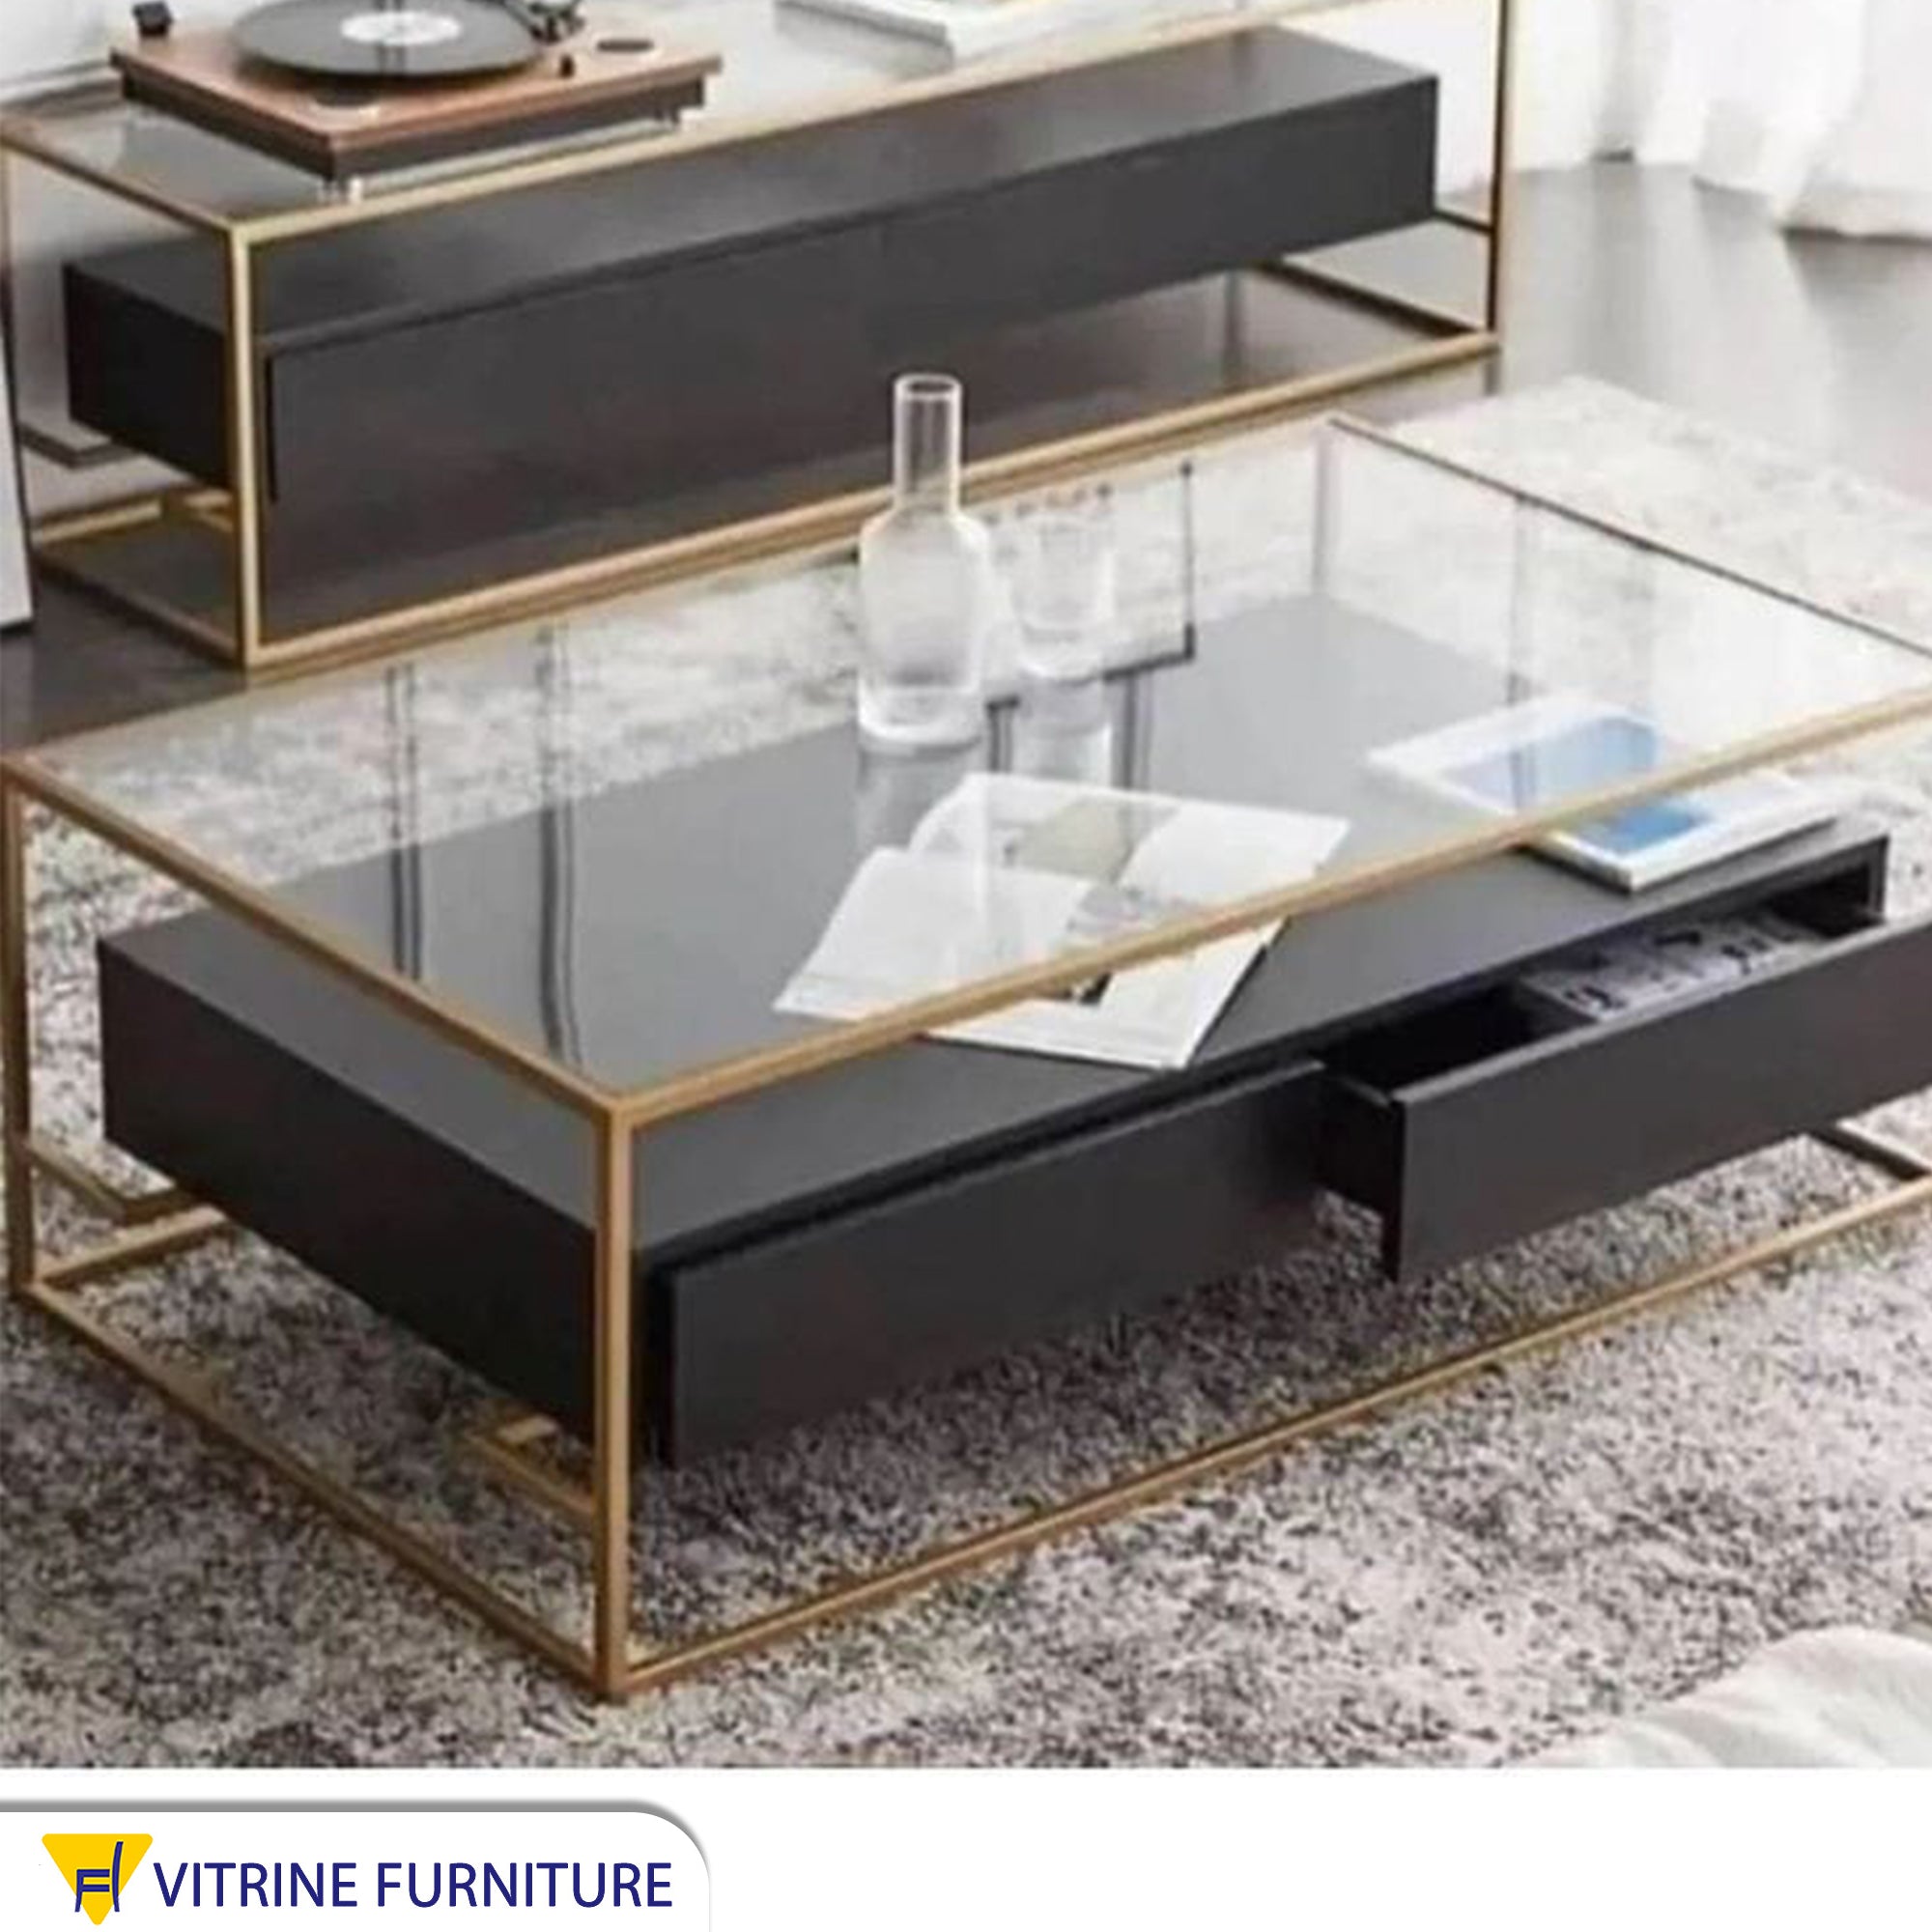 Gold steel table with black drawers